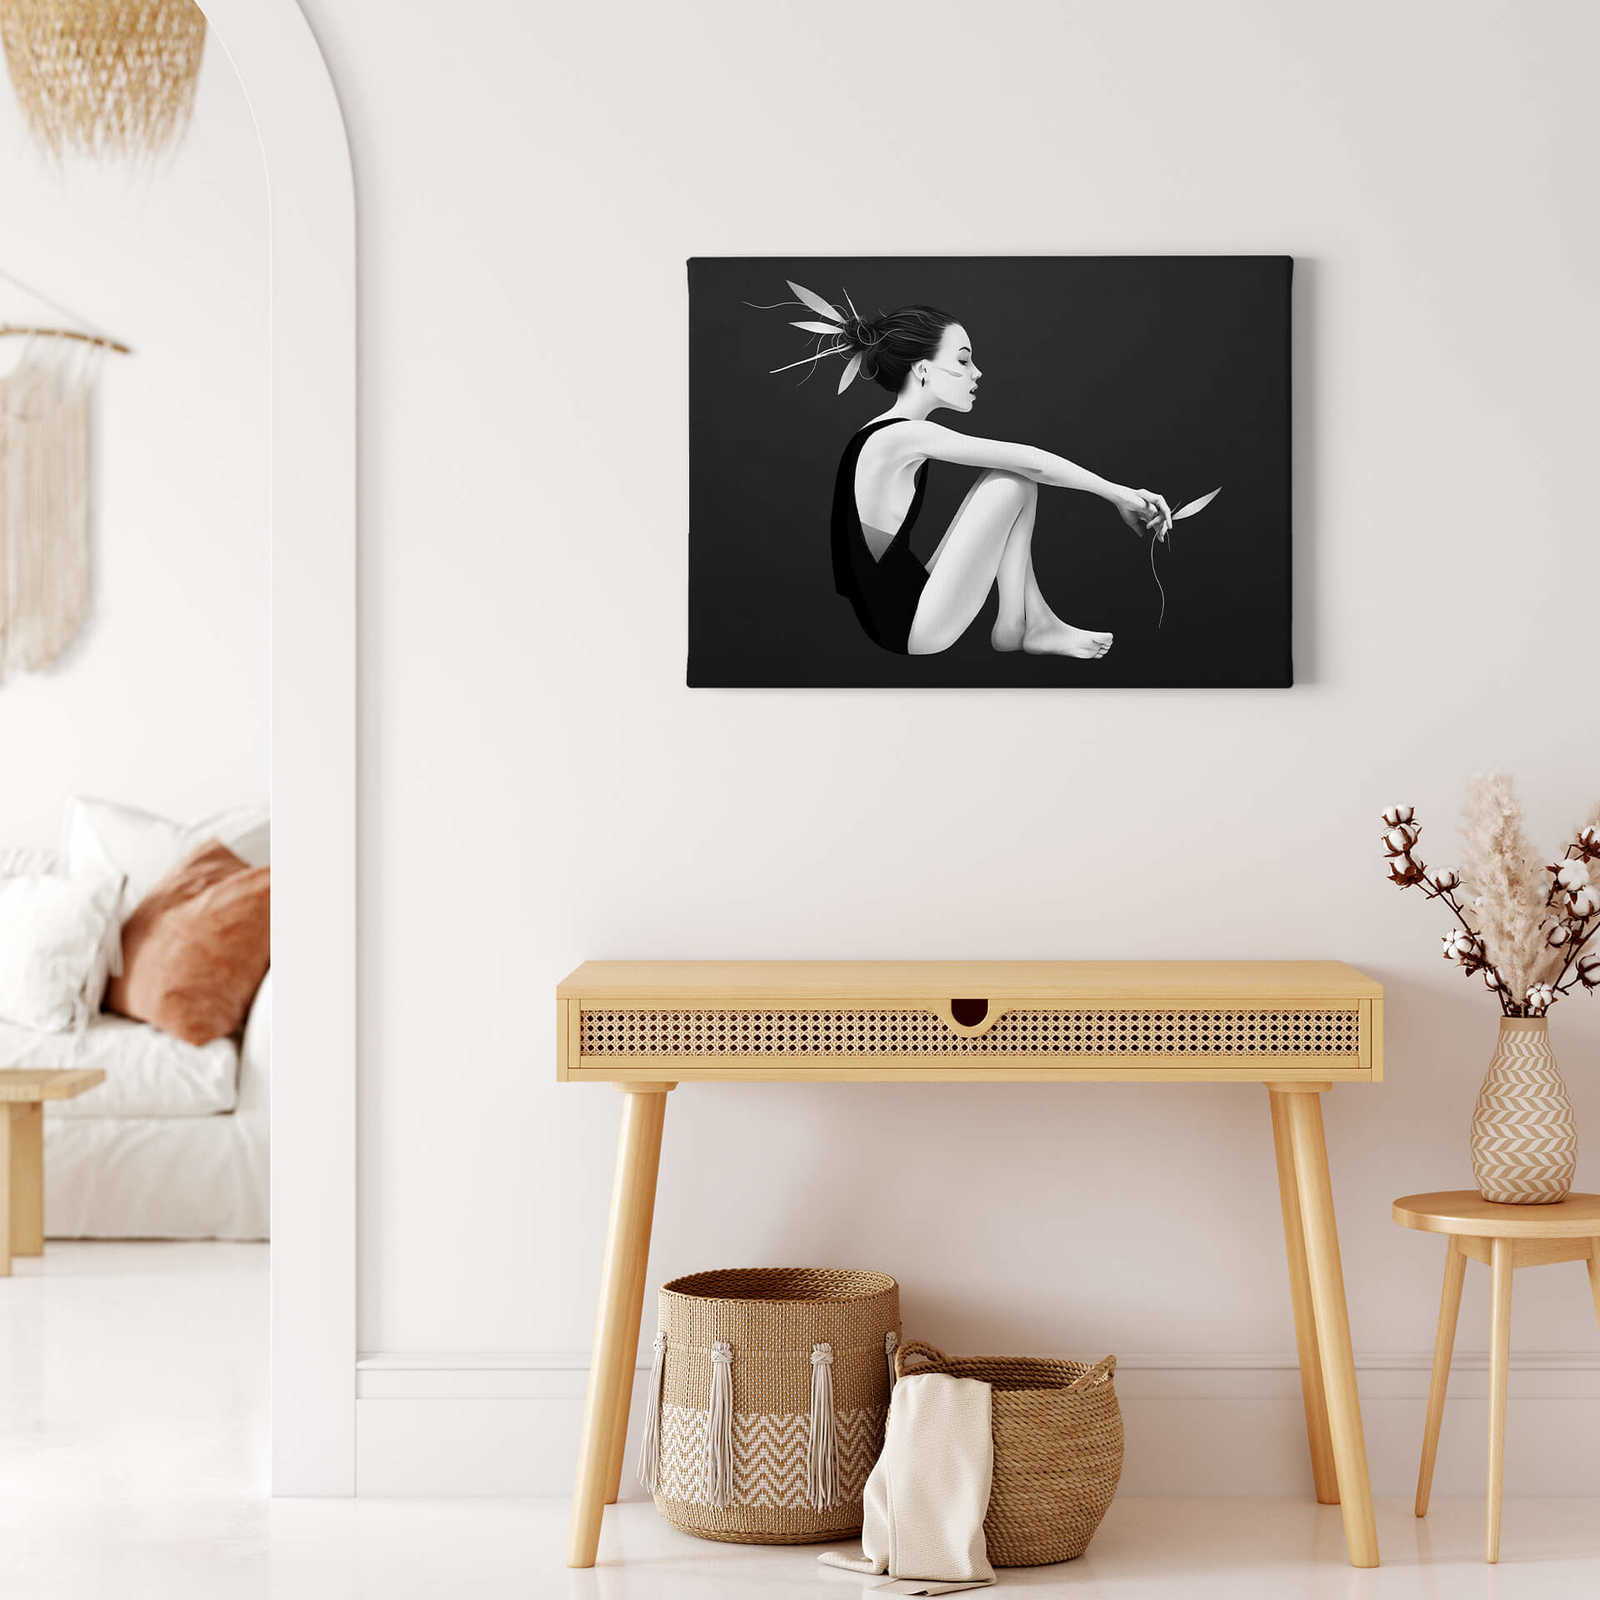             Black and white canvas print "Skyling", woman figure
        